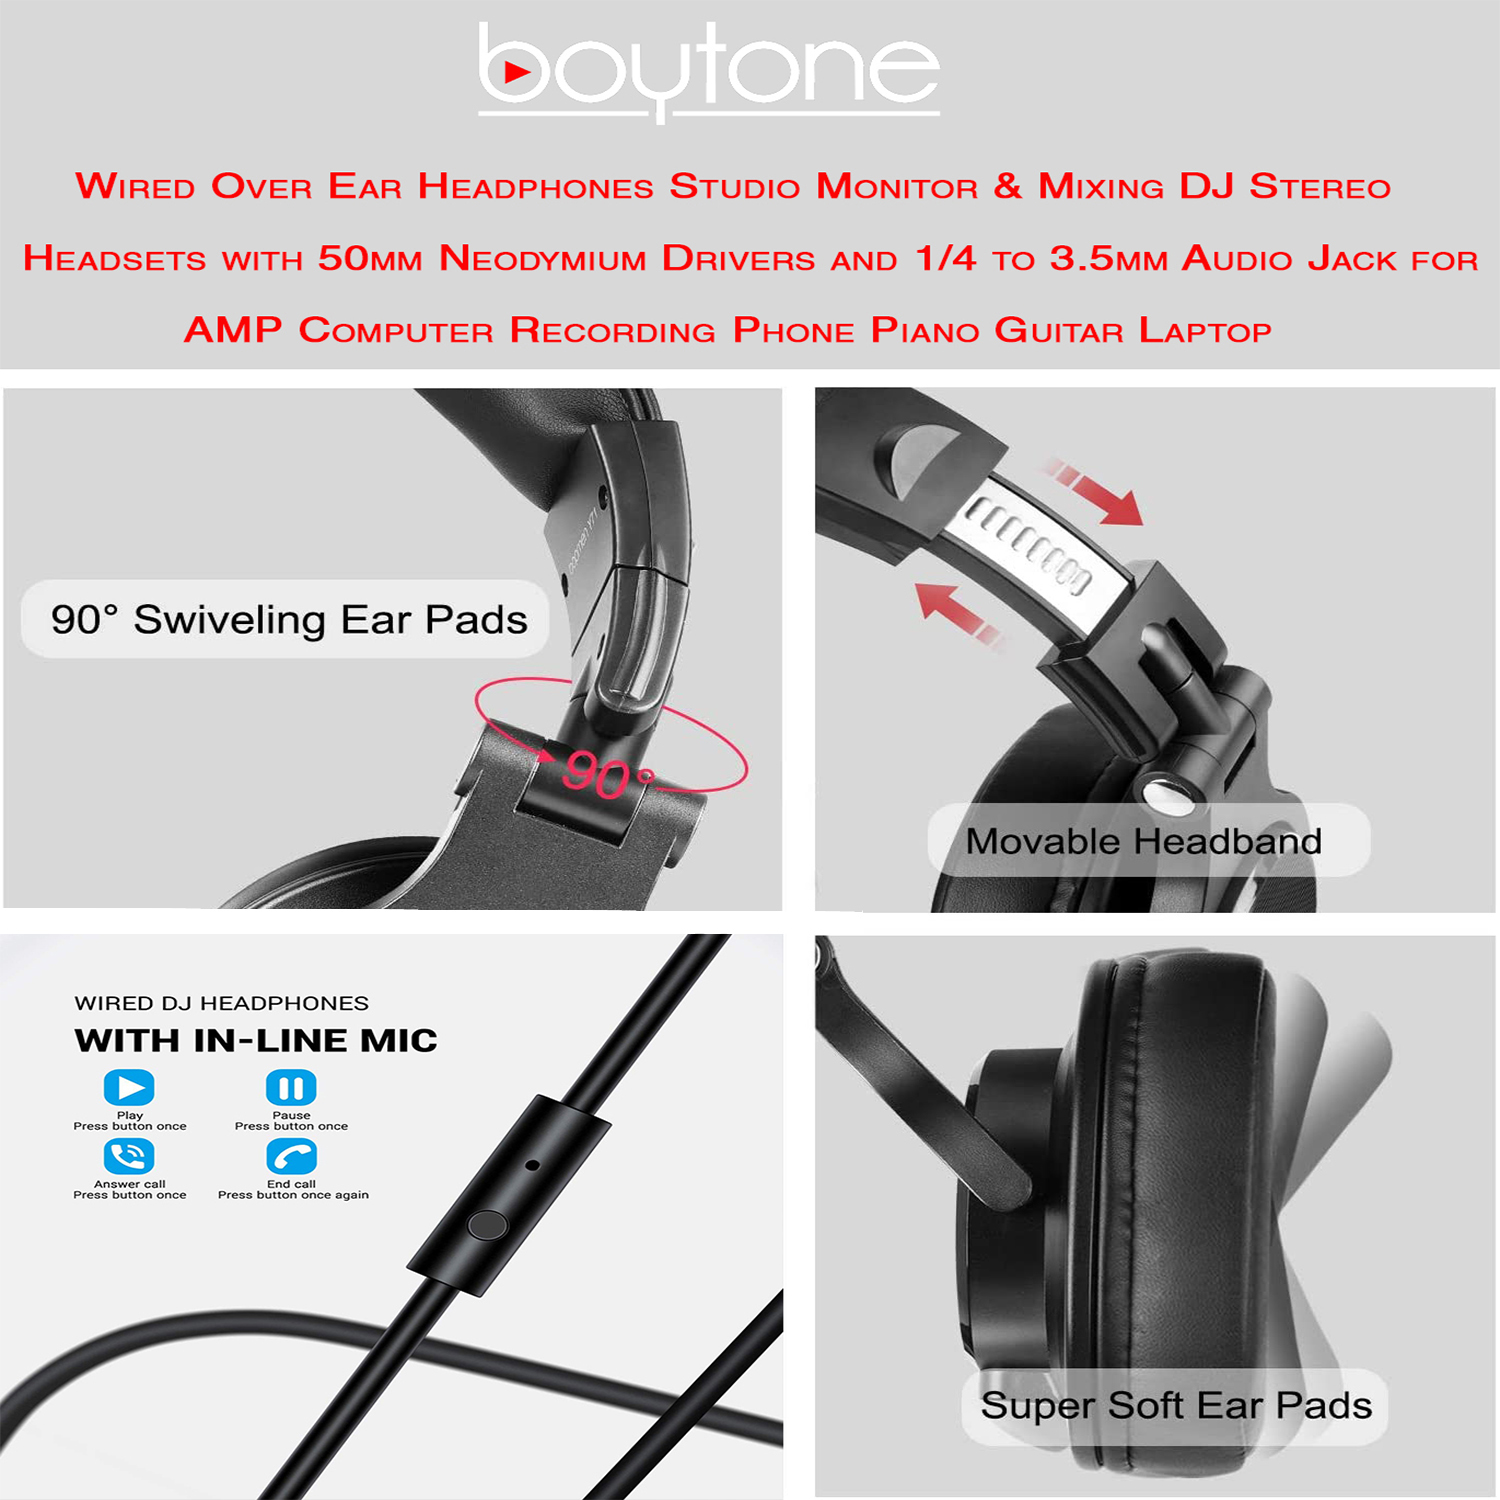 Boytone BT-10BR Wired Over Ear Headphones Studio Monitor & Mixing DJ Stereo Headsets with 50mm Drivers